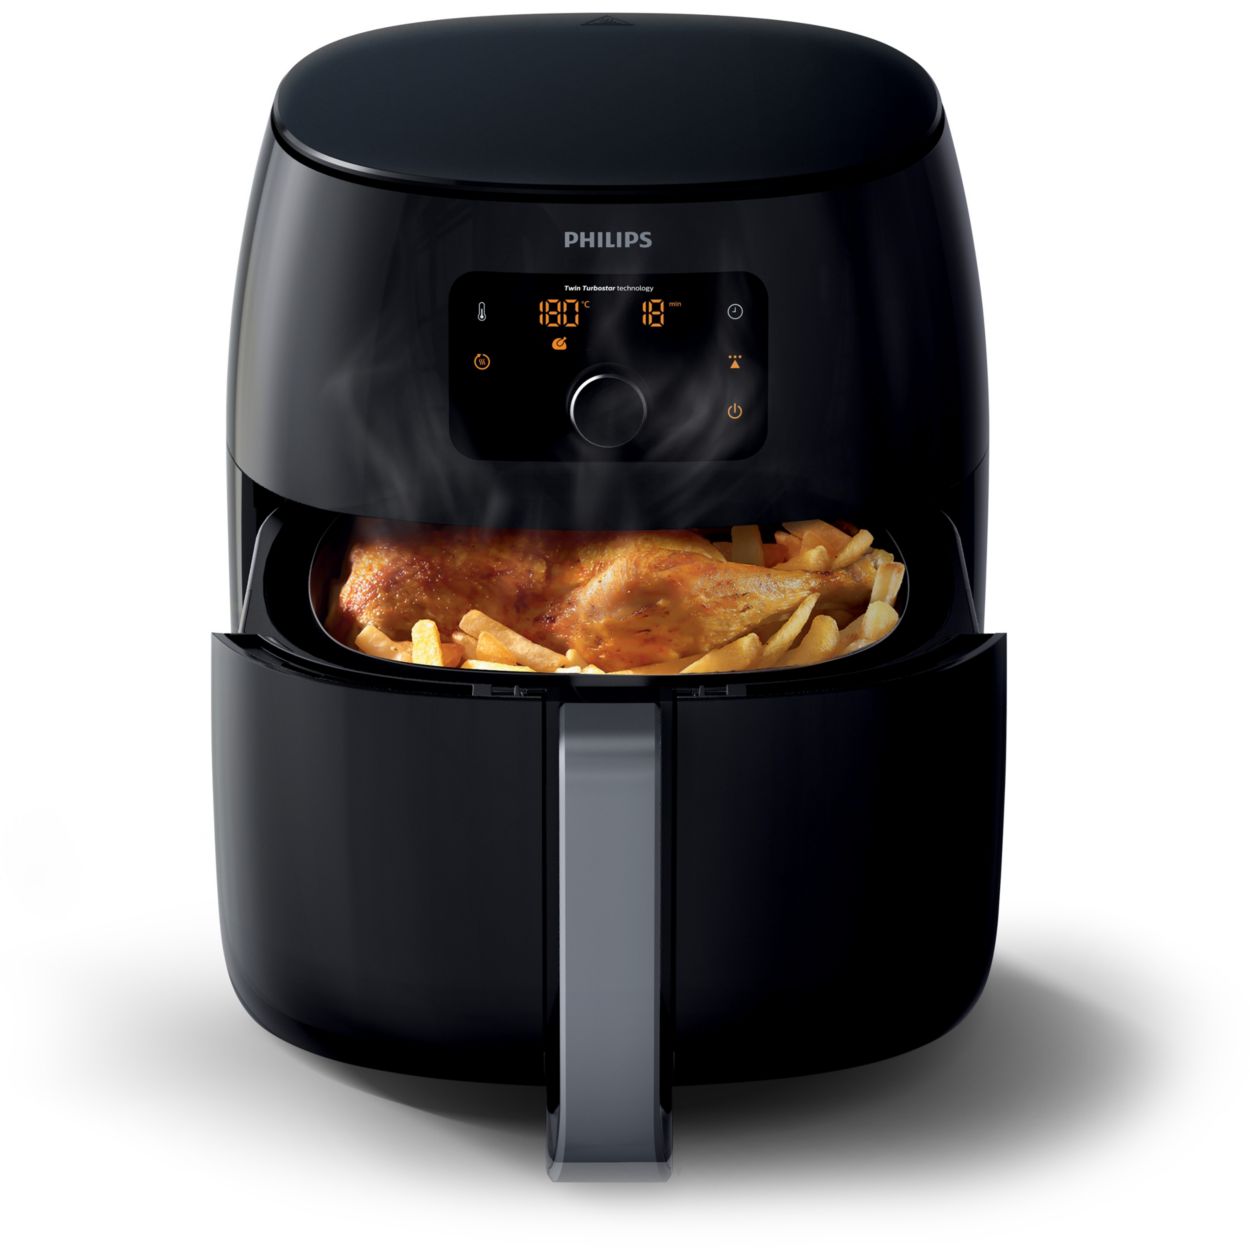 Philips air fryer deals: Save almost 50% off at